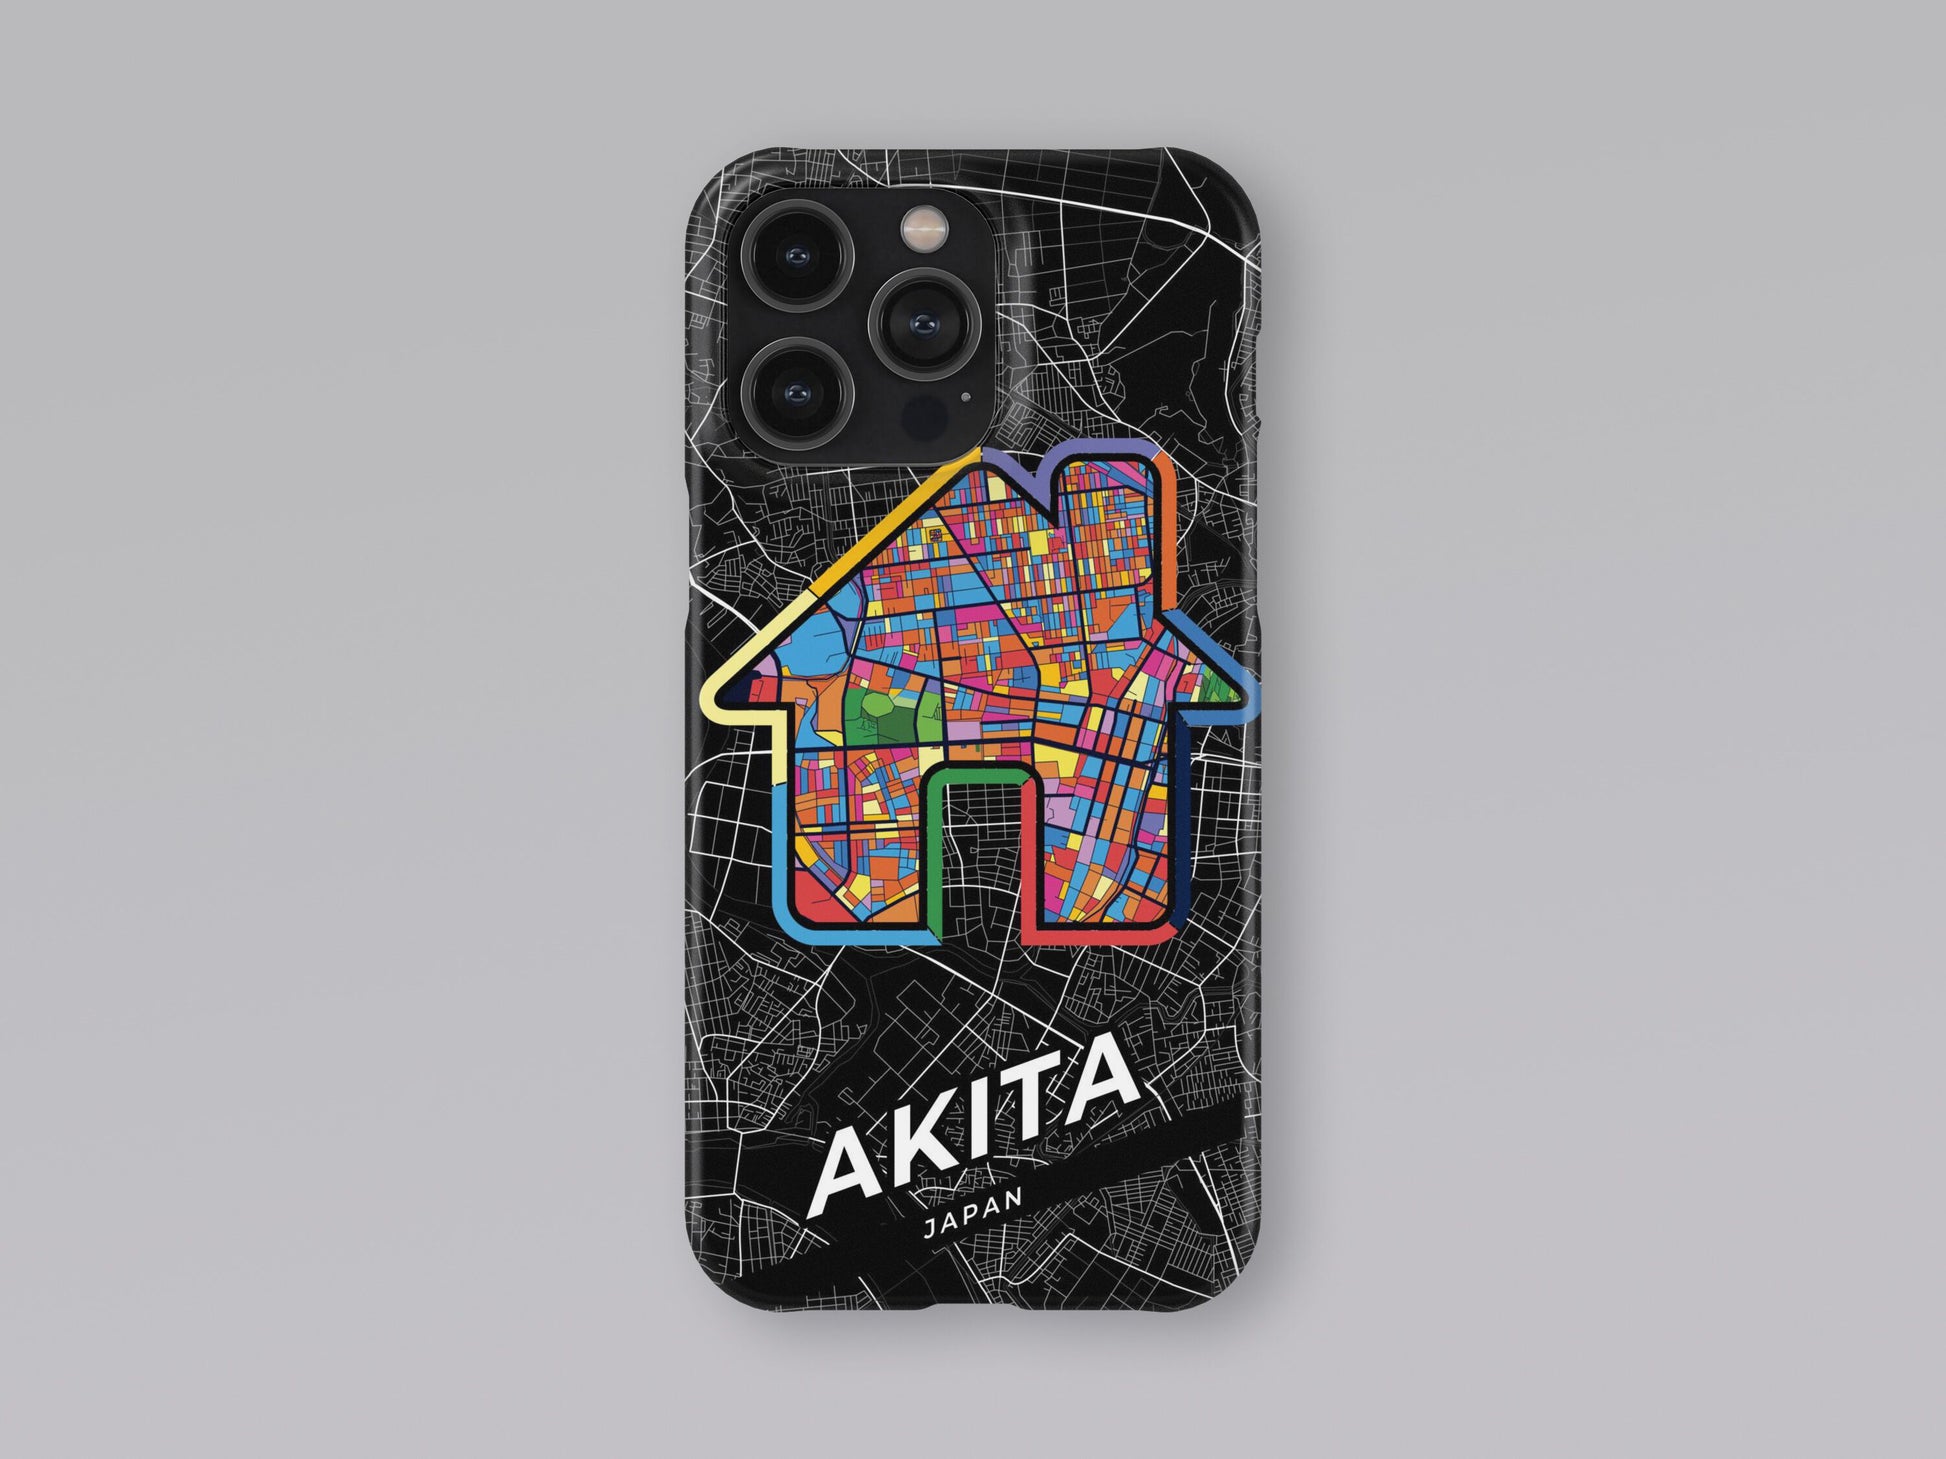 Akita Japan slim phone case with colorful icon. Birthday, wedding or housewarming gift. Couple match cases. 3